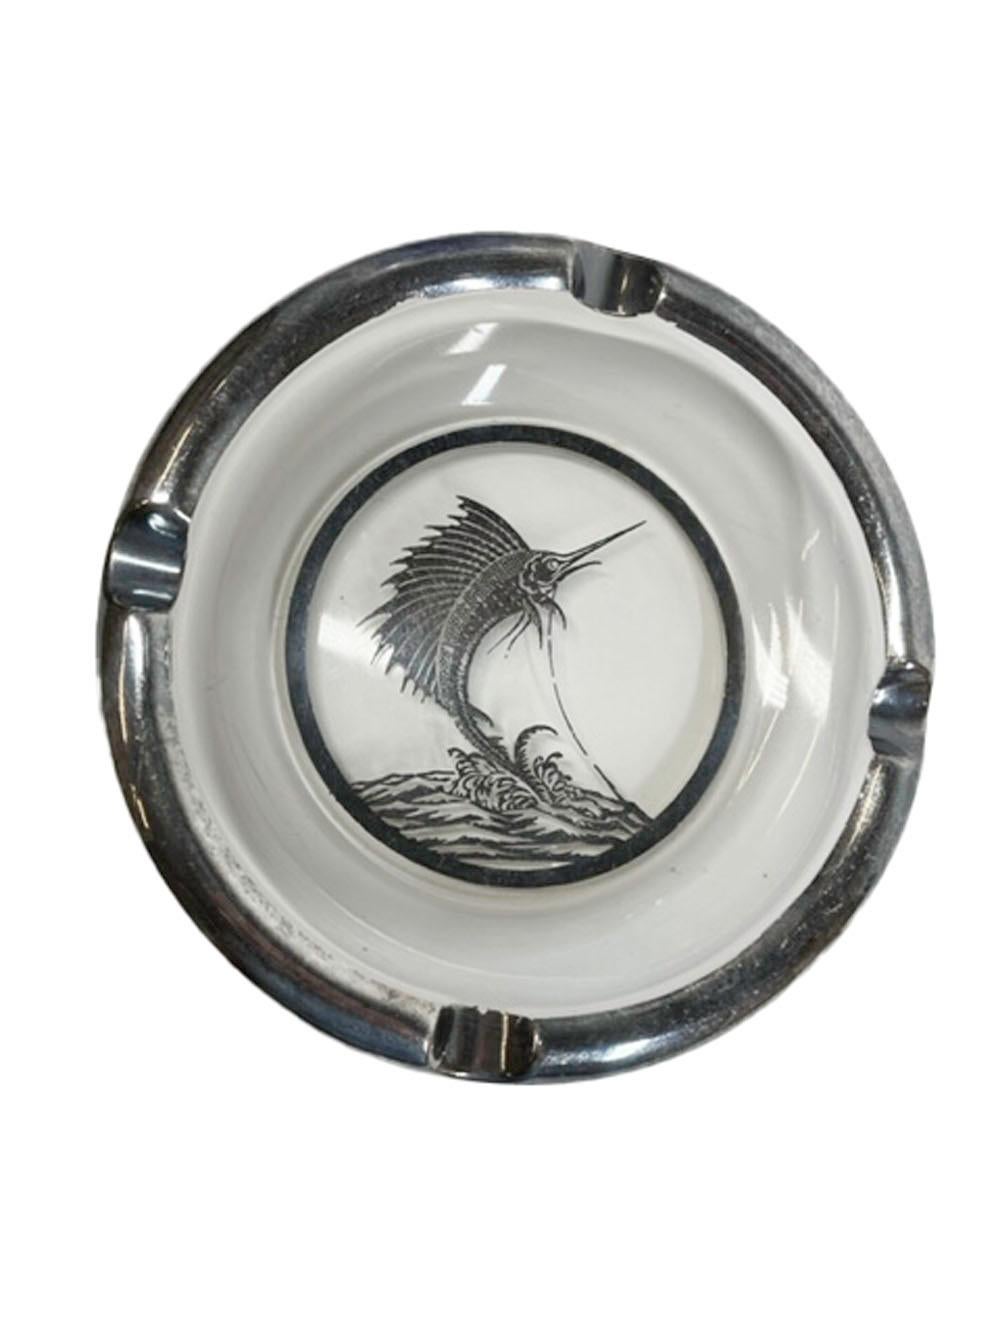 Art Deco silver overlay ashtray by Rockwell Silver Company with a silver overlay four divot rim centering a hooked leaping marlin over waves.